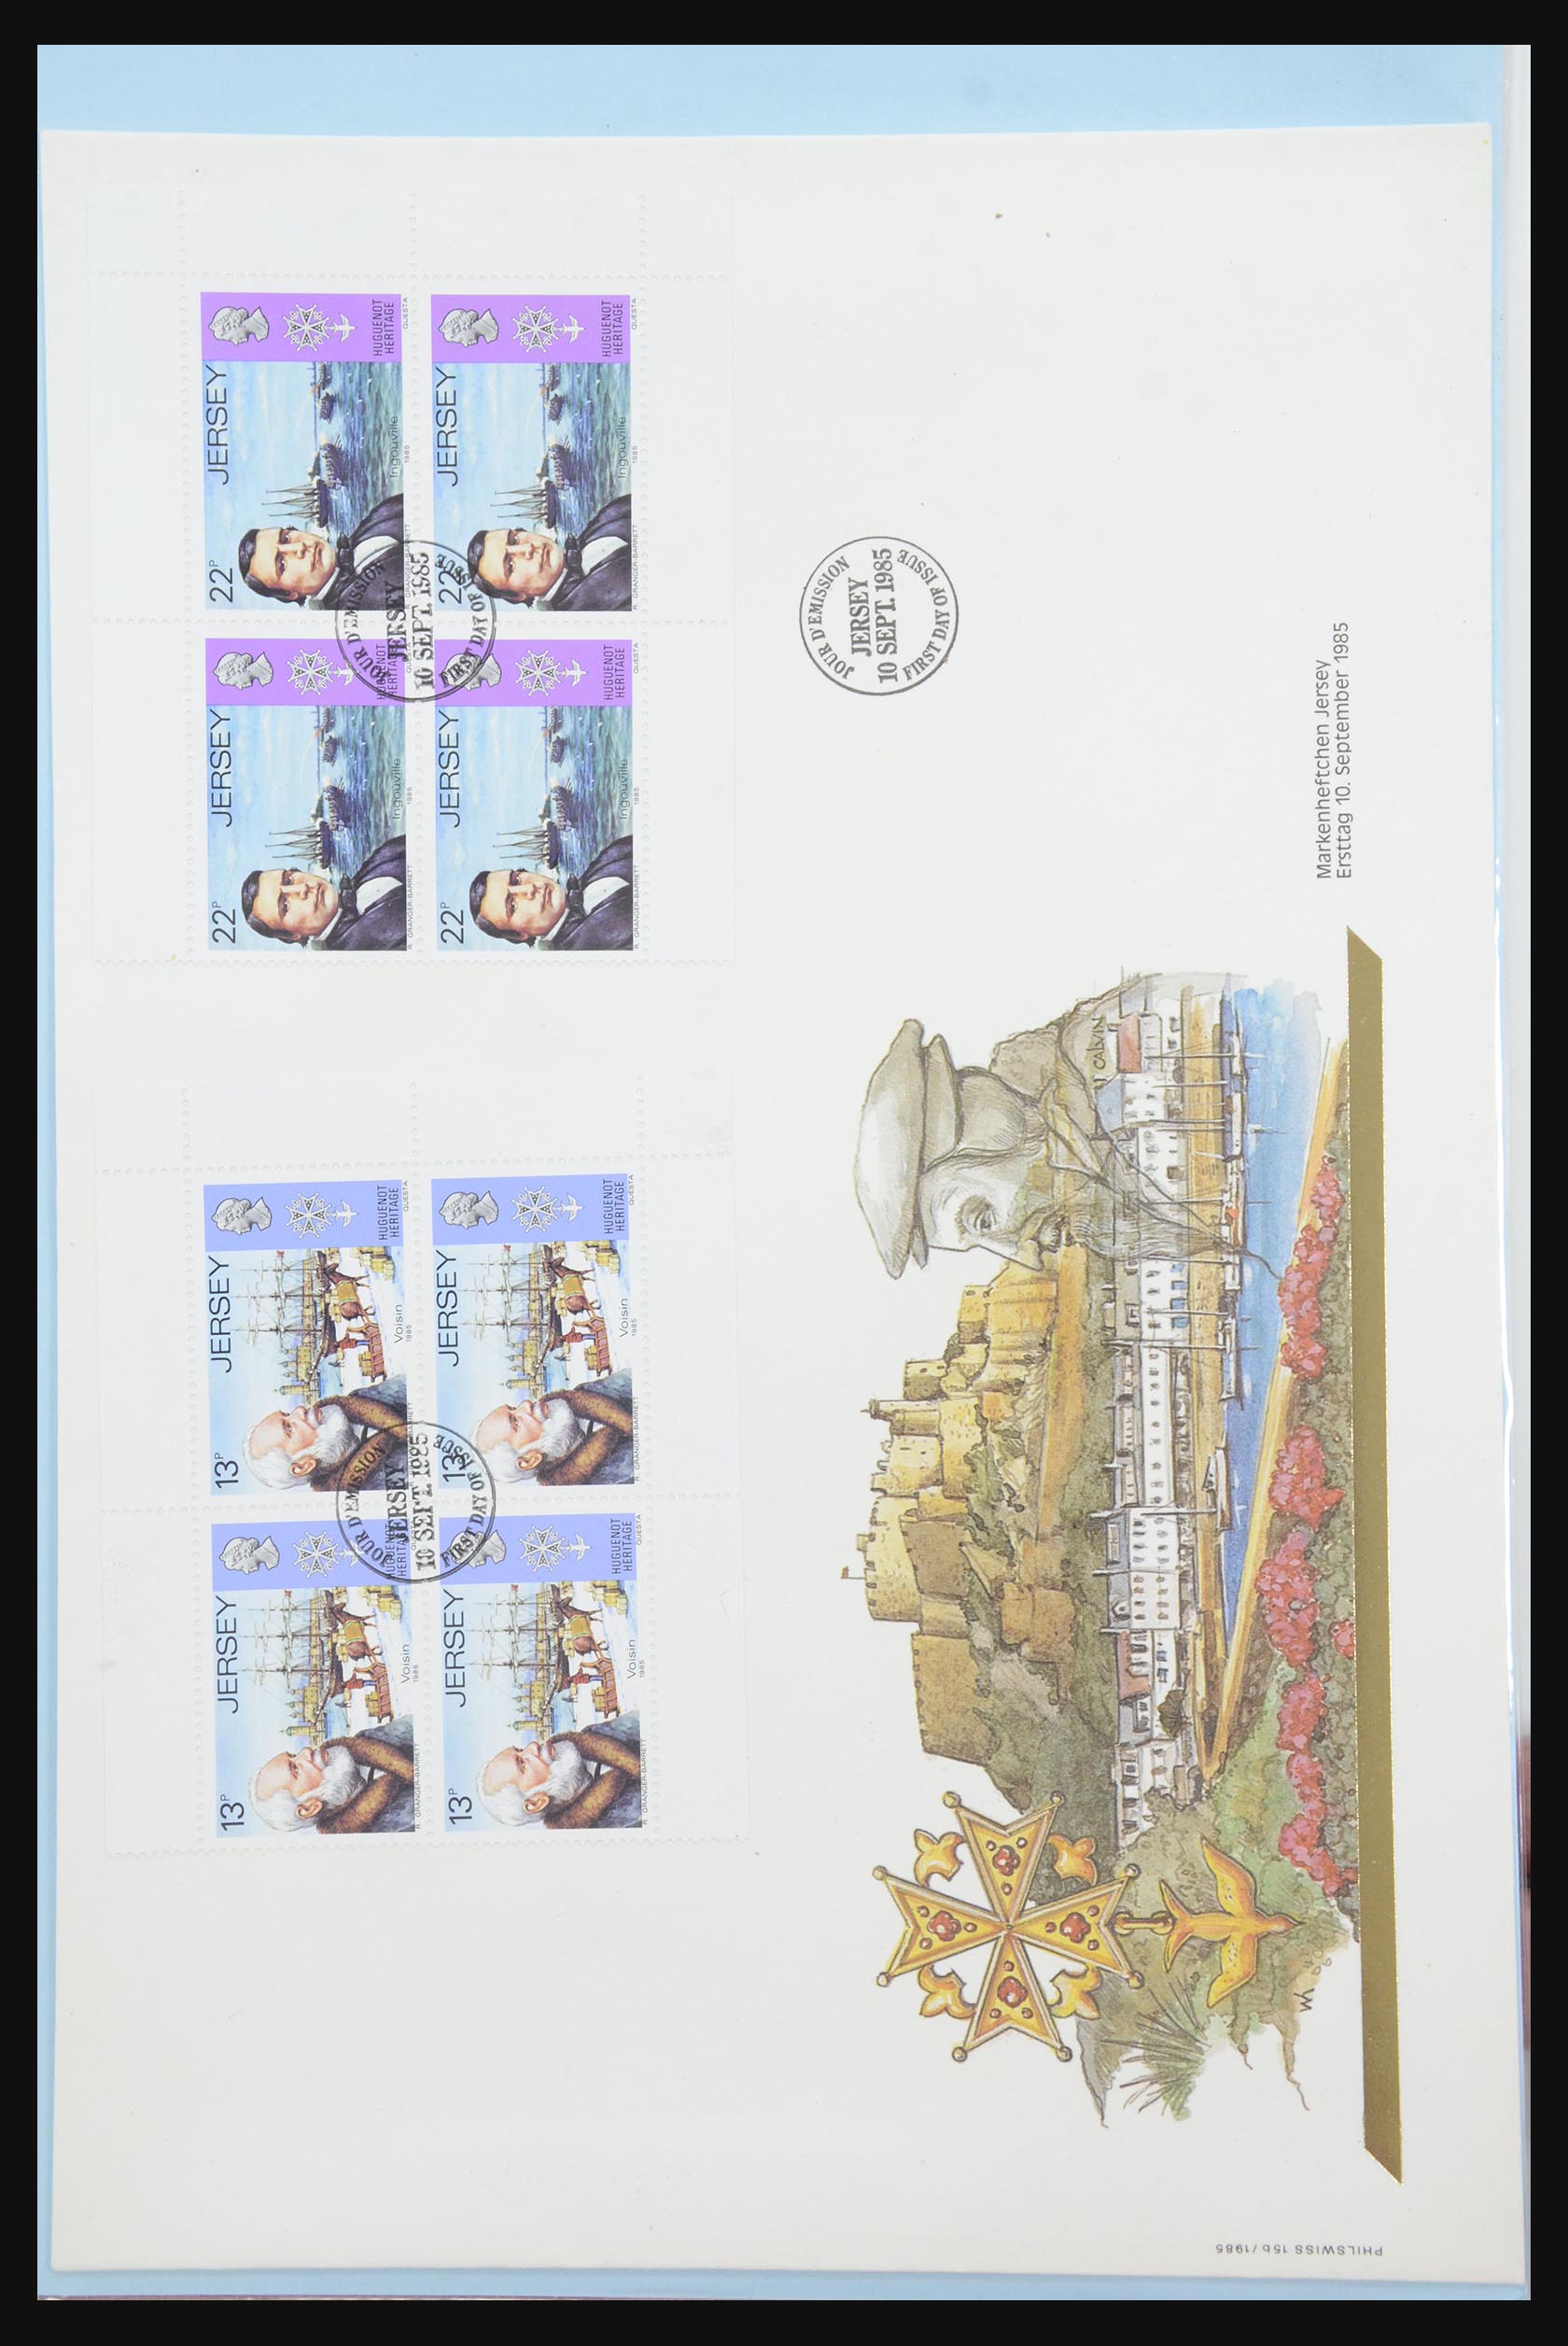 31915 082 - 31915 Western Europe souvenir sheets and stamp booklets on FDC.